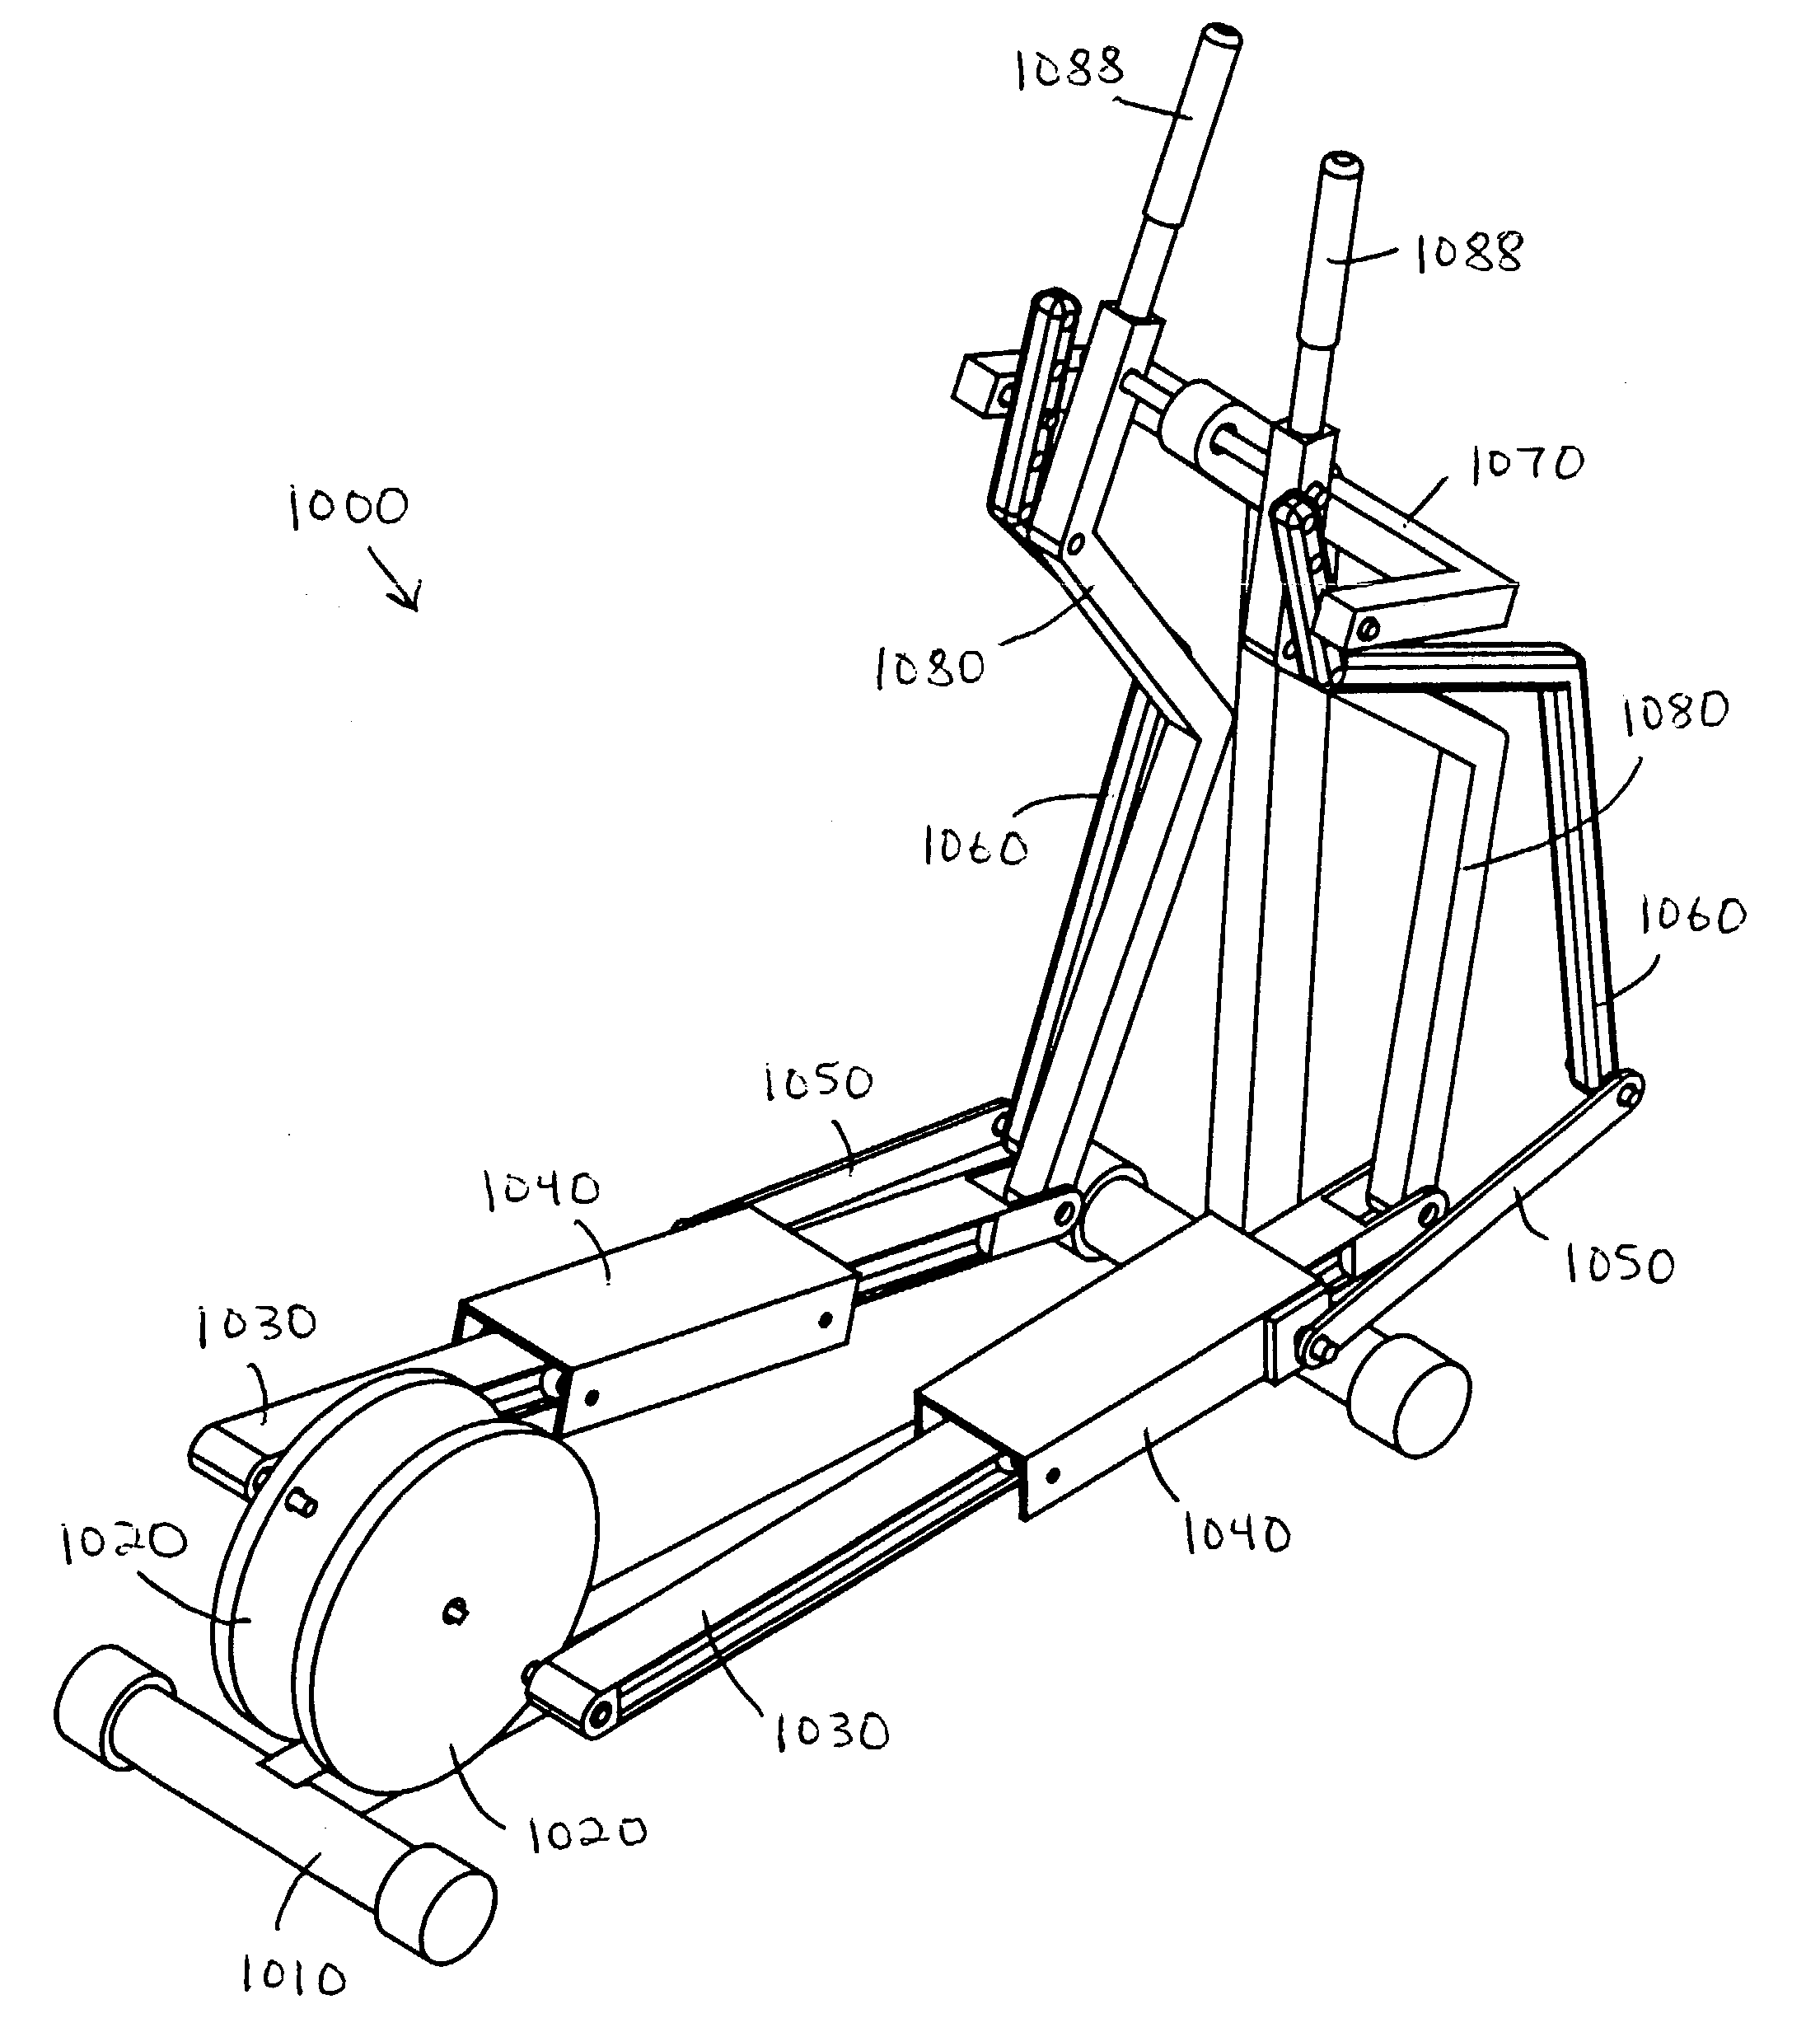 Exercise methods and apparatus